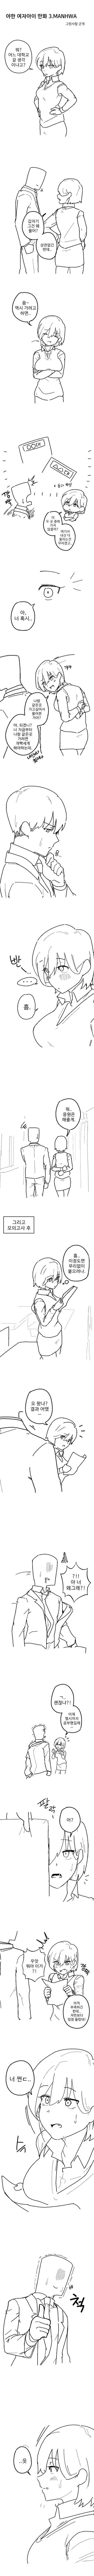 24post.co.kr_003.png